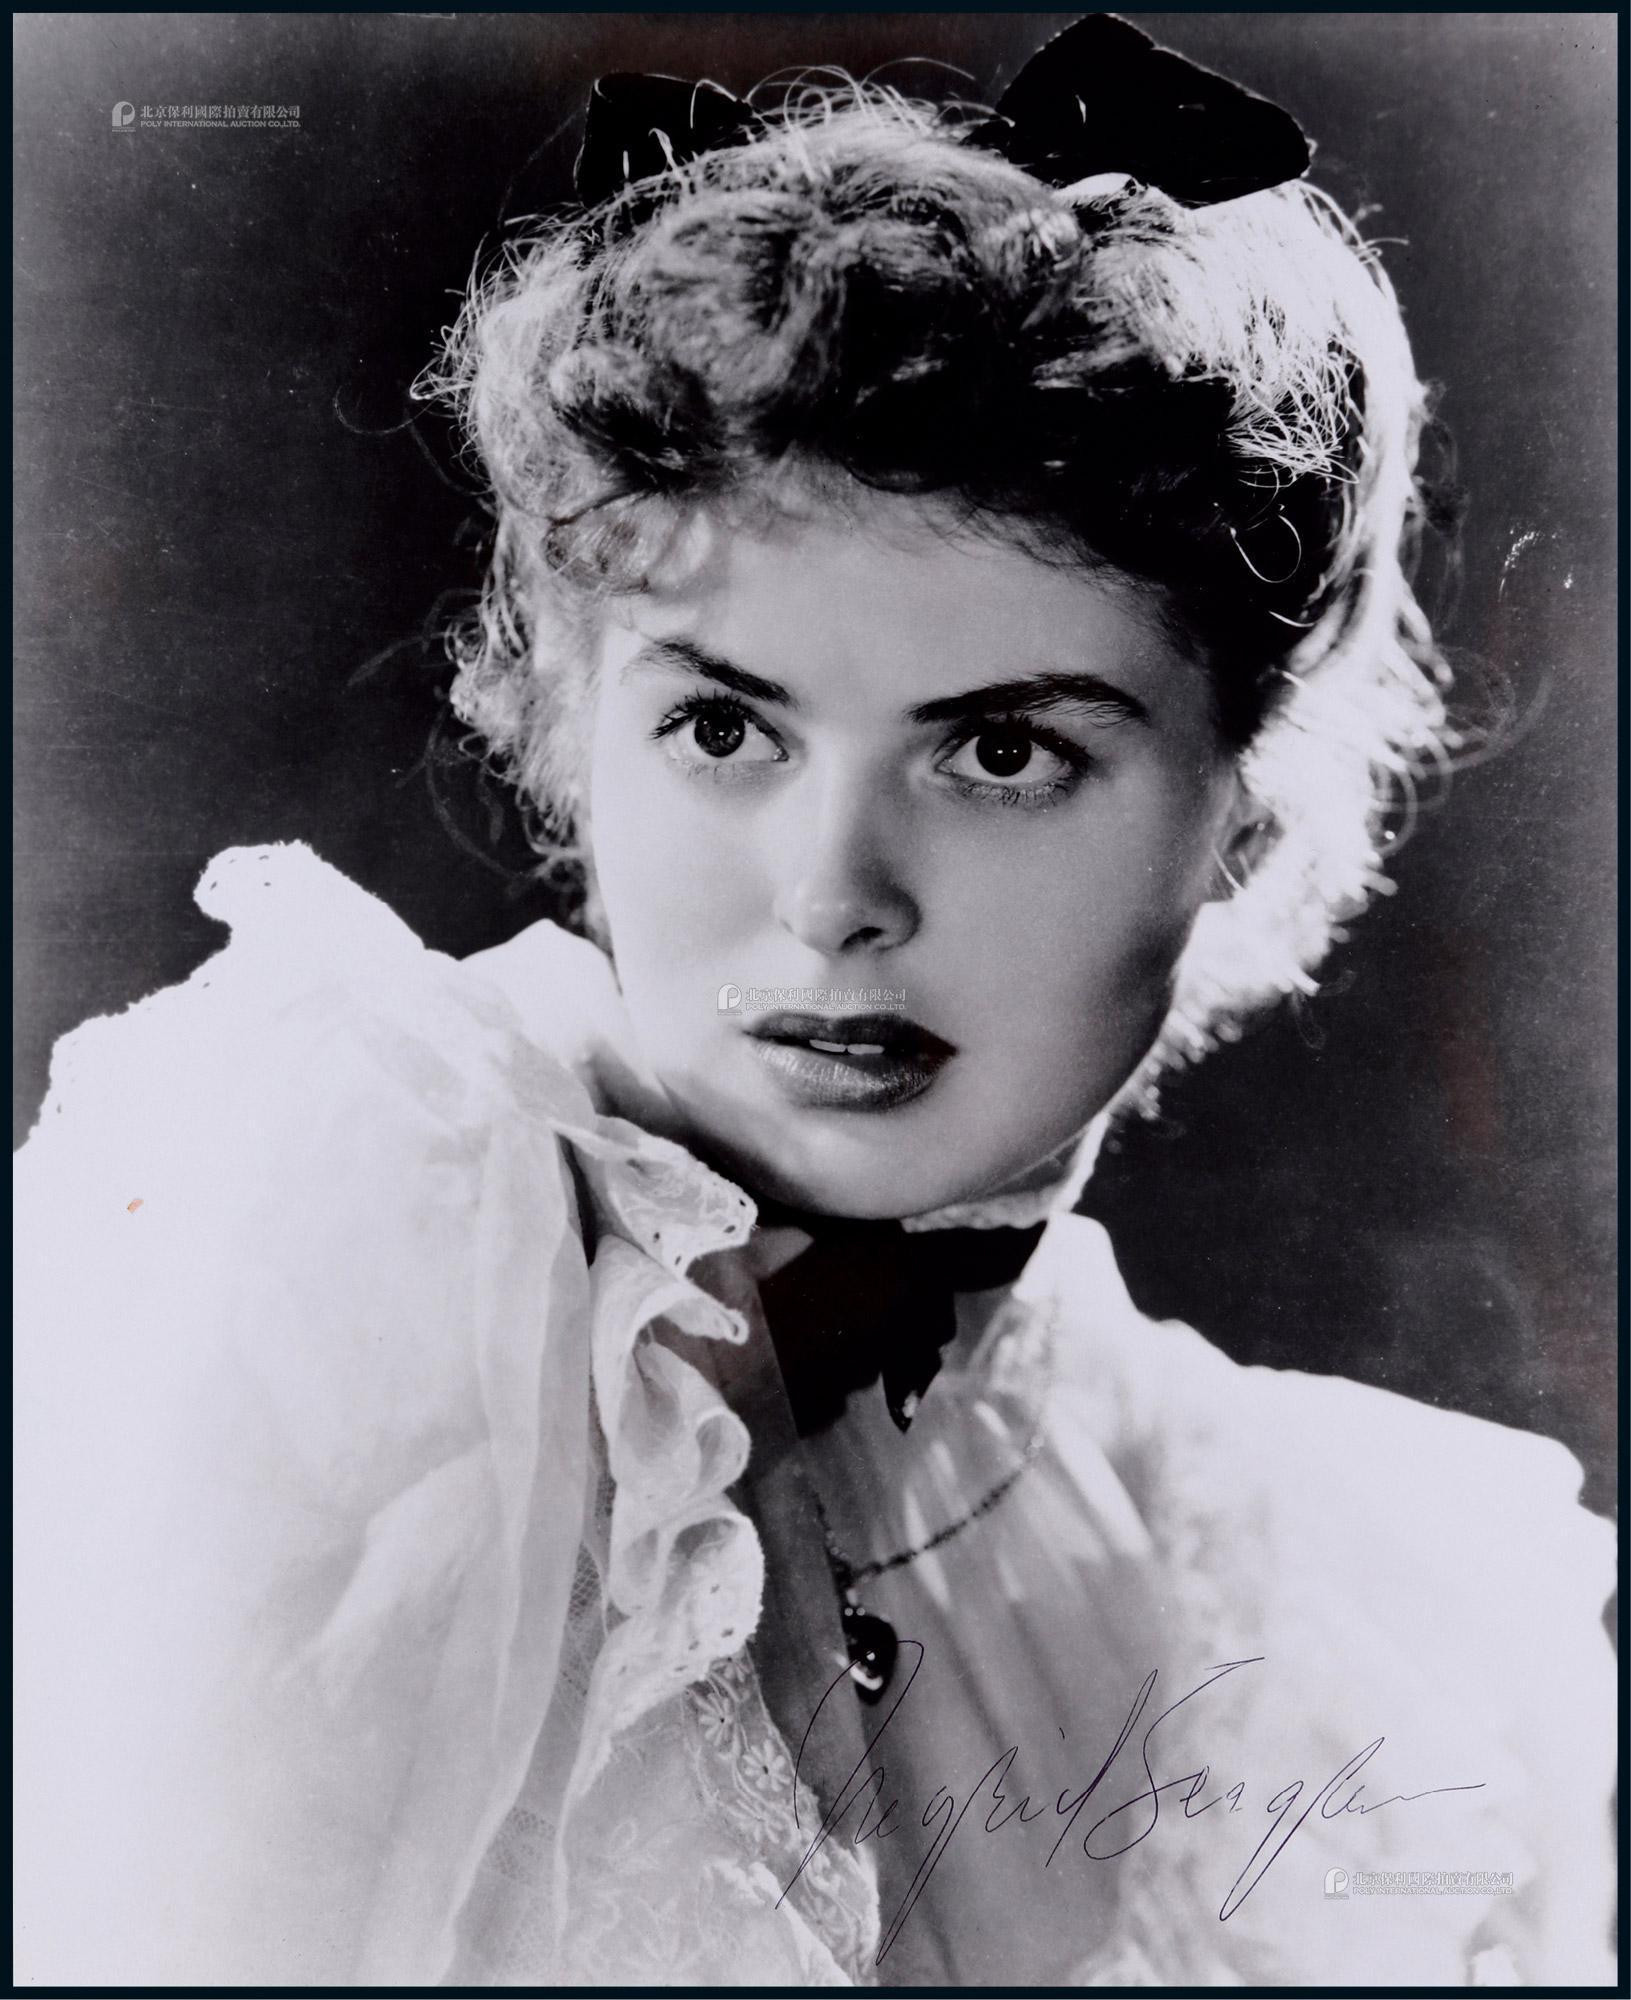 The autographed photo of Ingrid Bergman, “First Lady of Hollywood”, with certificate